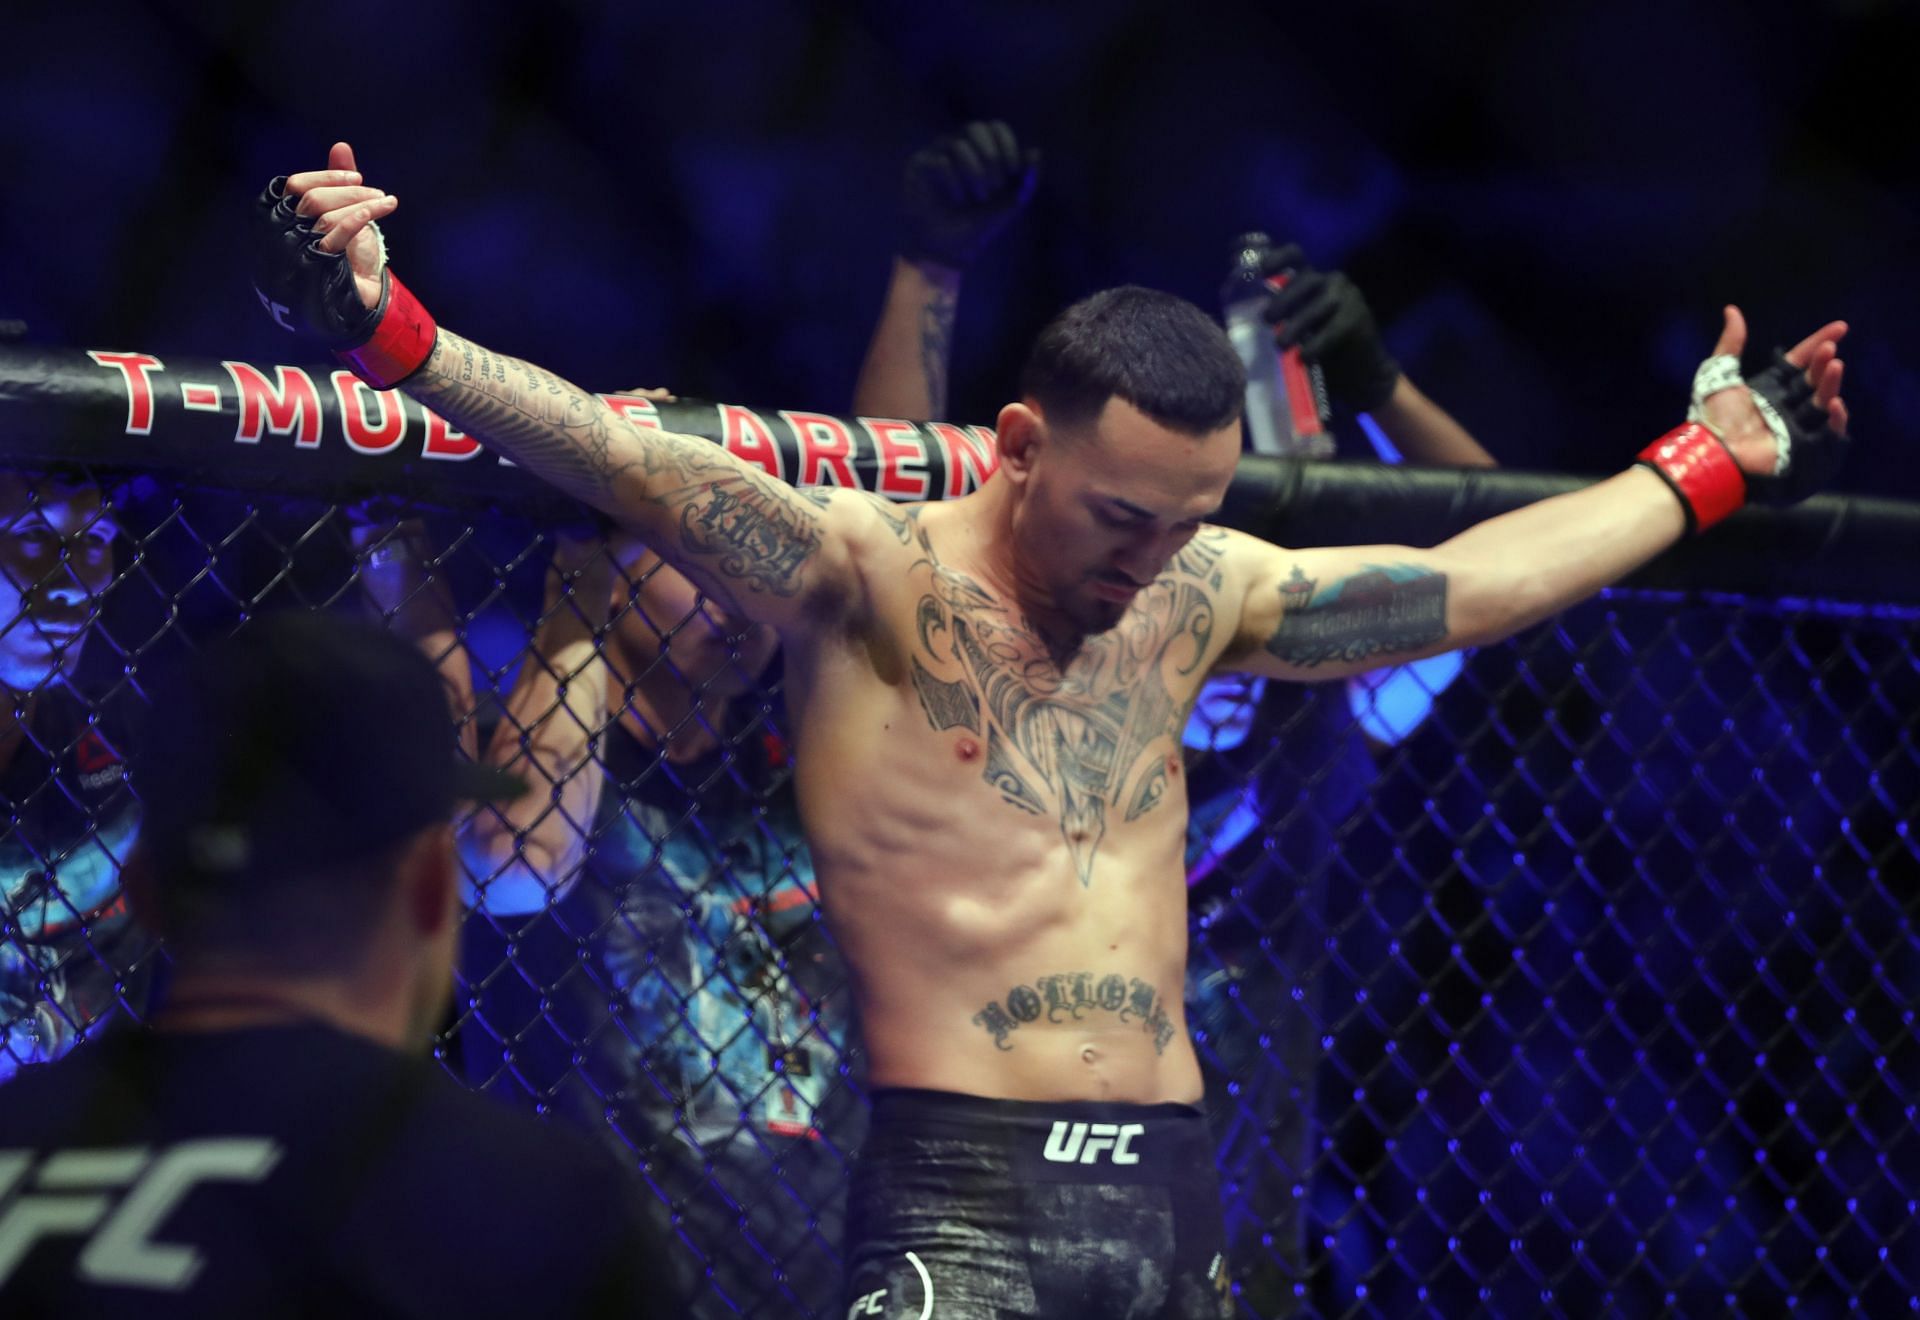 Max Holloway would be considered the GOAT at featherweight were it not for Alexander Volkanovski